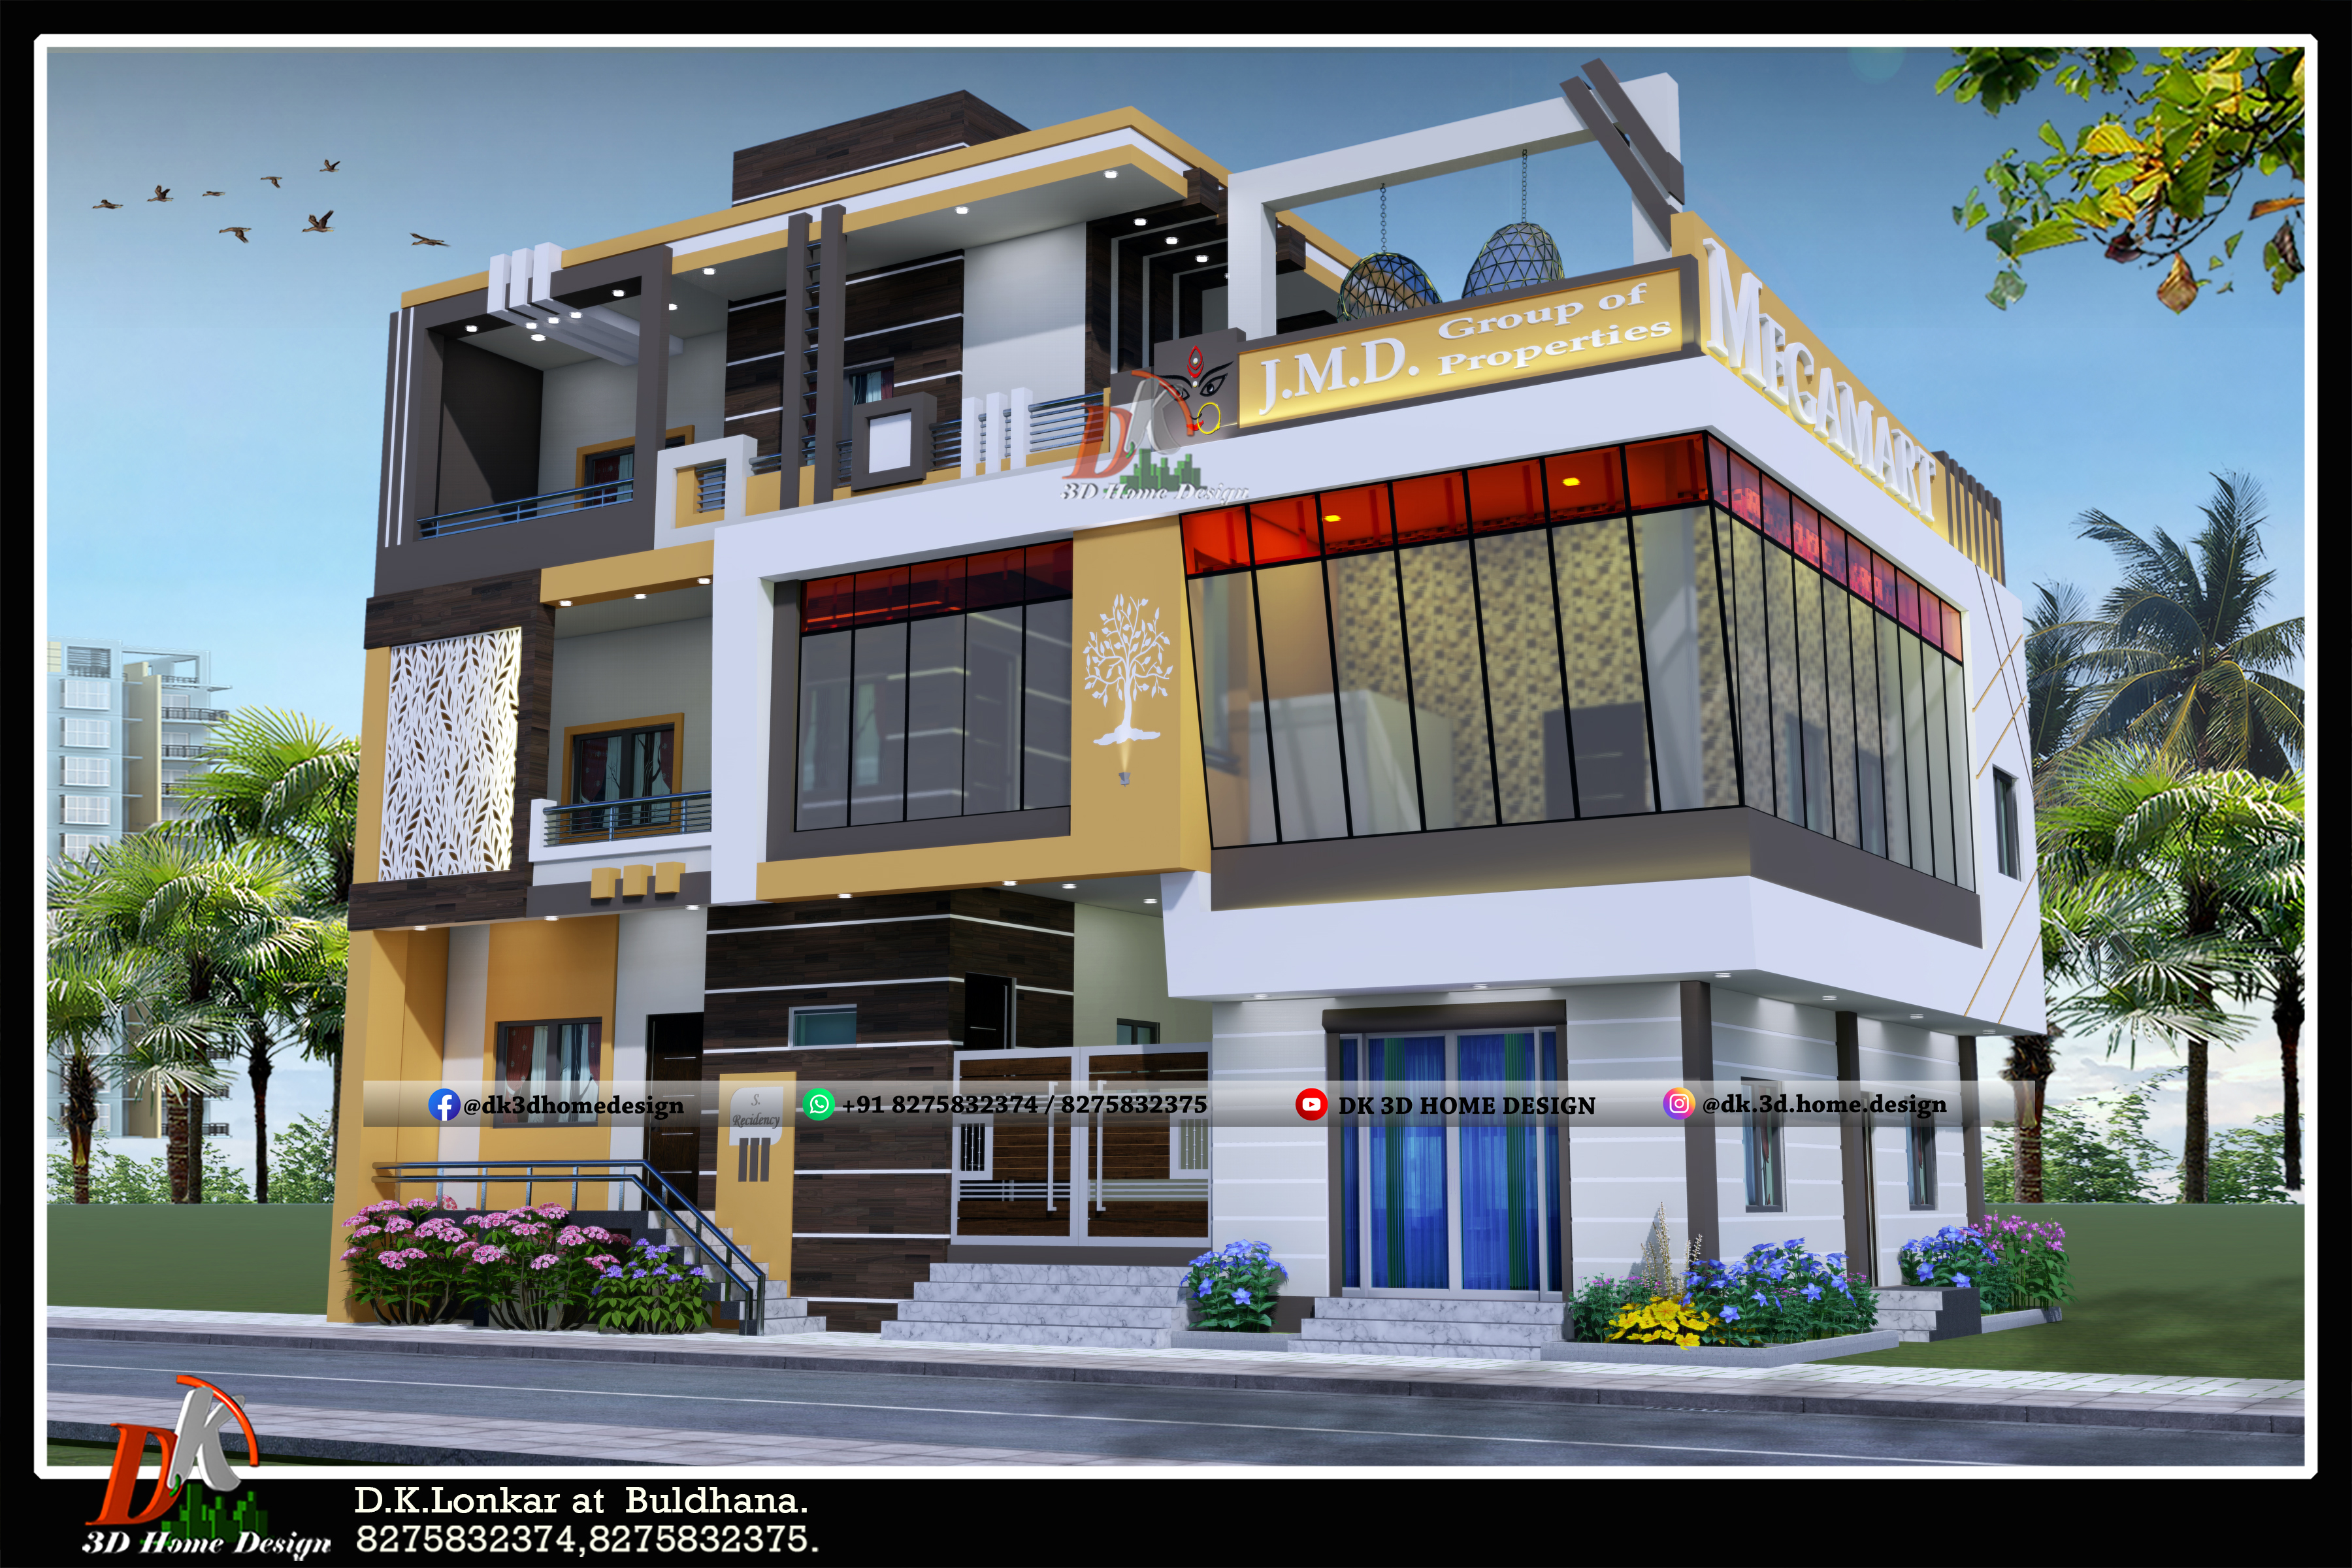 Commercial plus residential multi-story building design